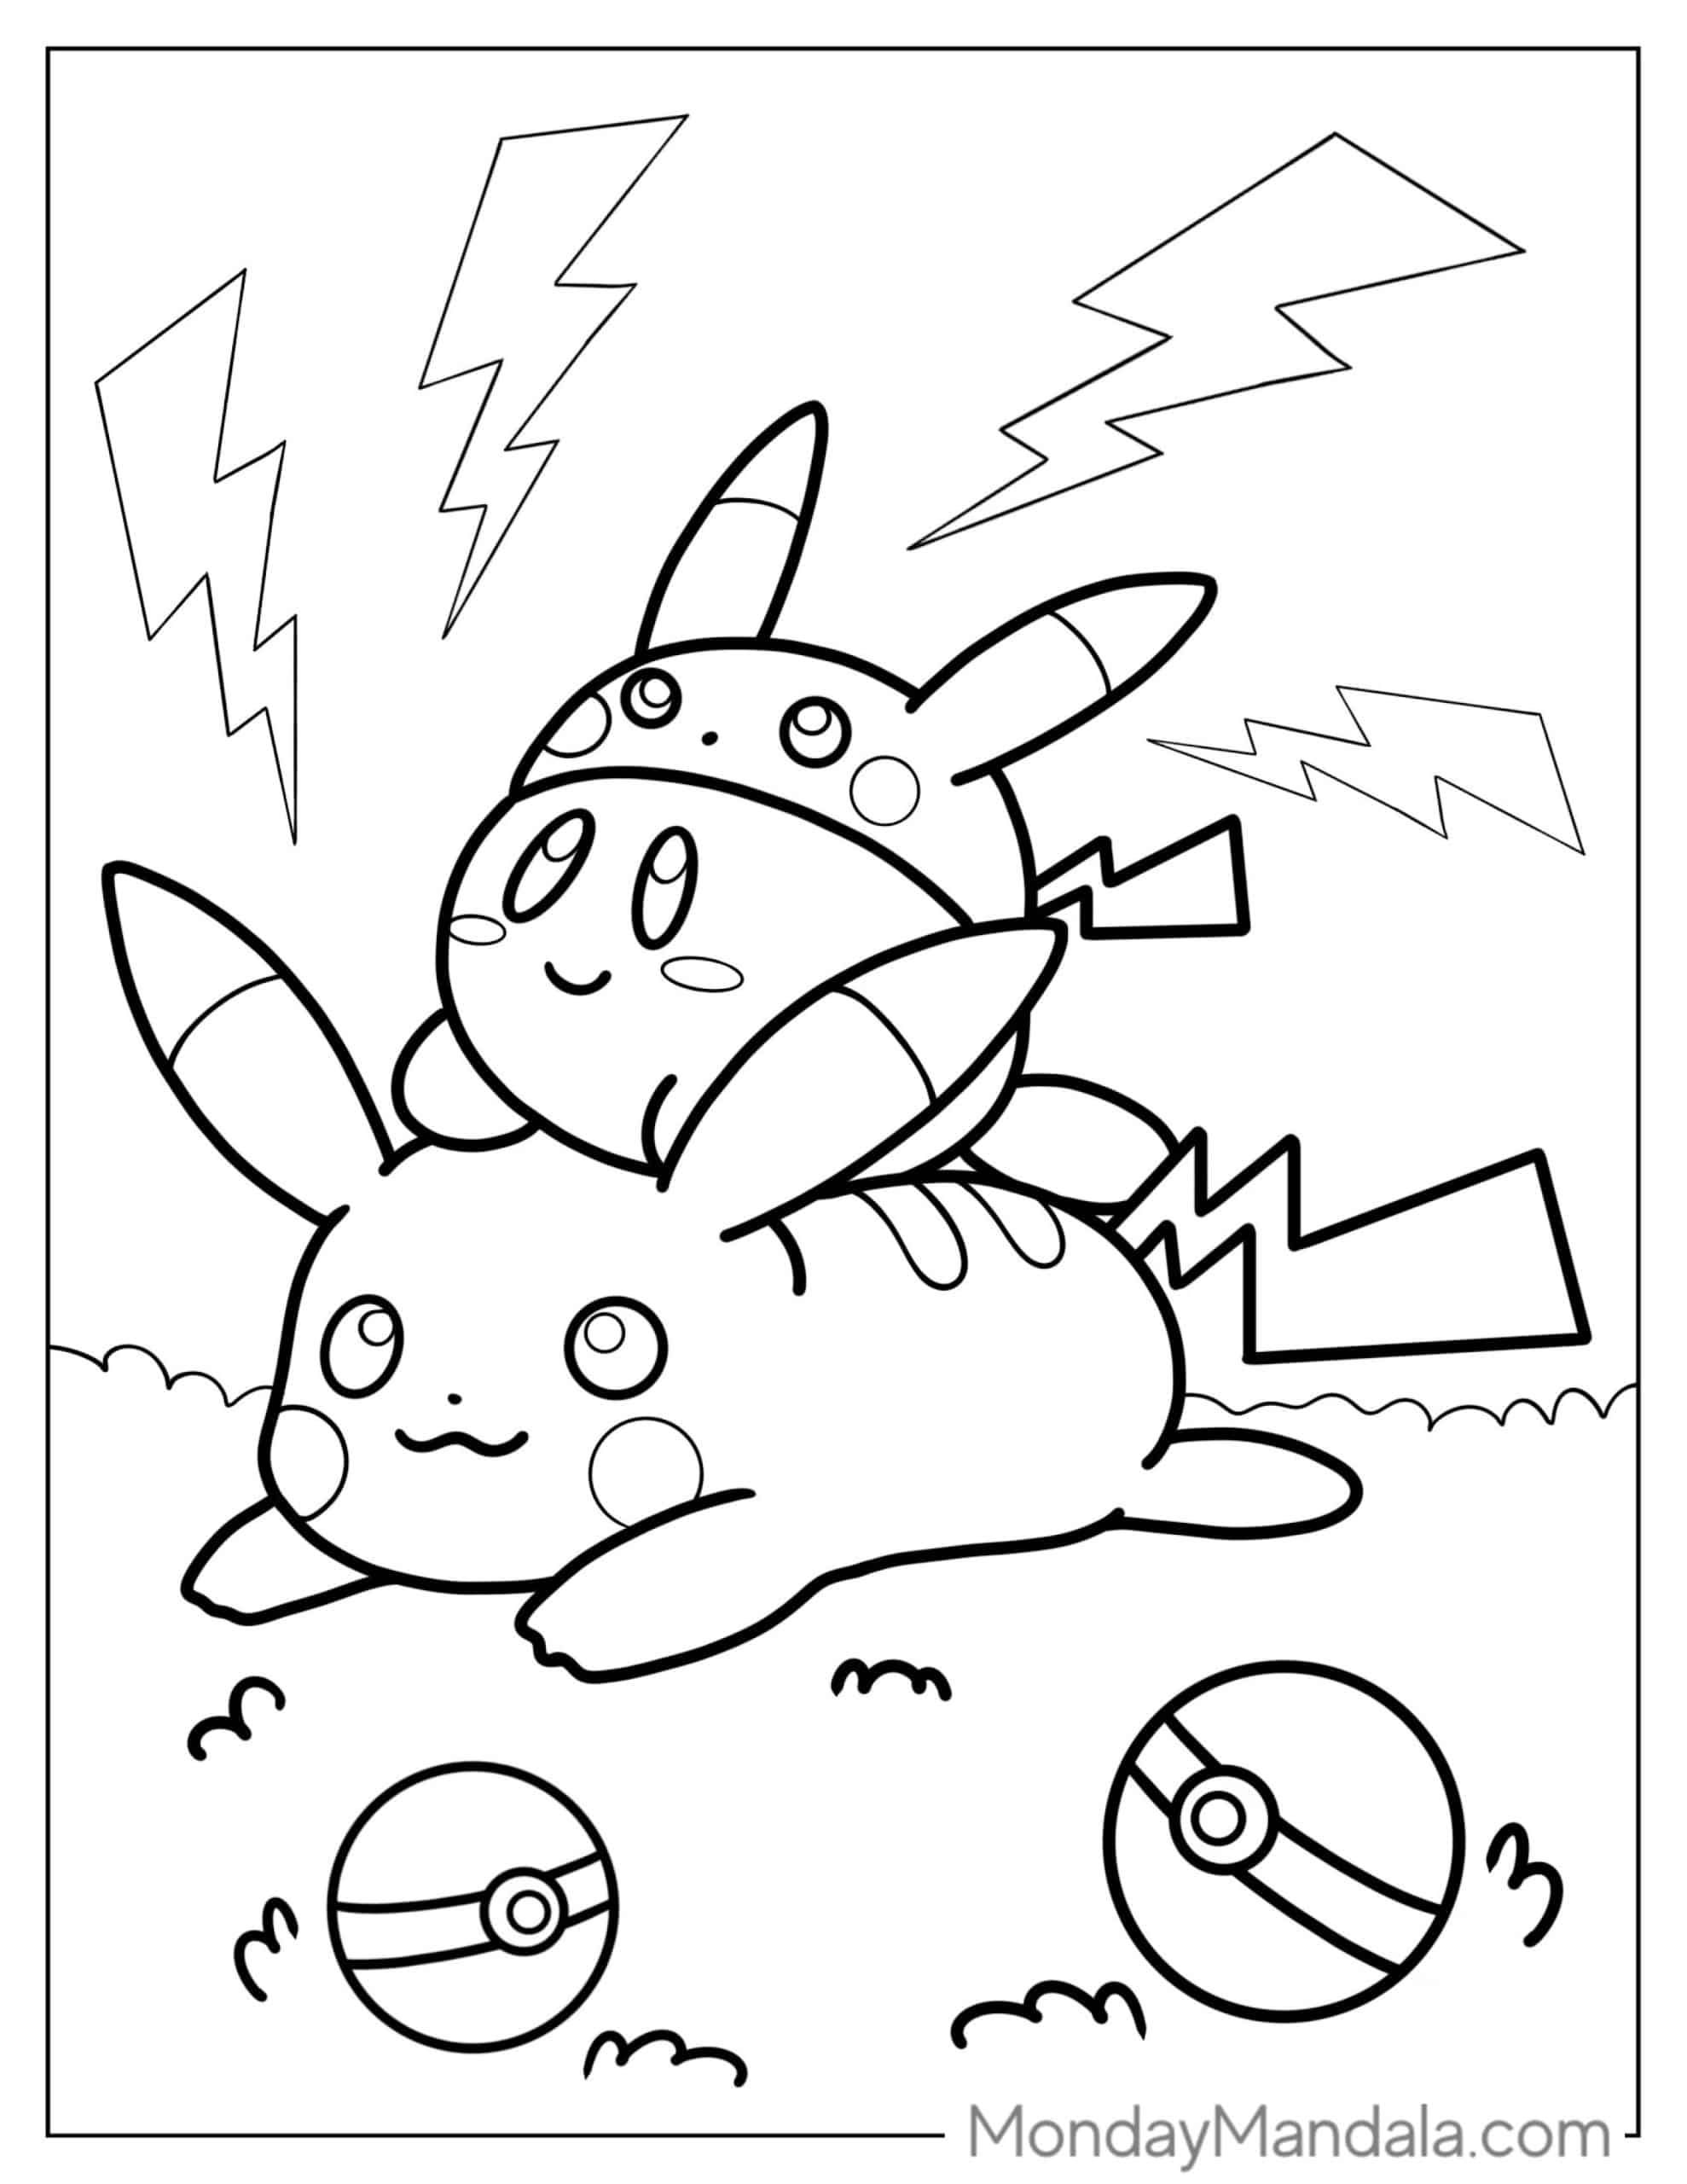 Kirby coloring pages free pdf printables coloring book art coloring pages pokemon coloring pages